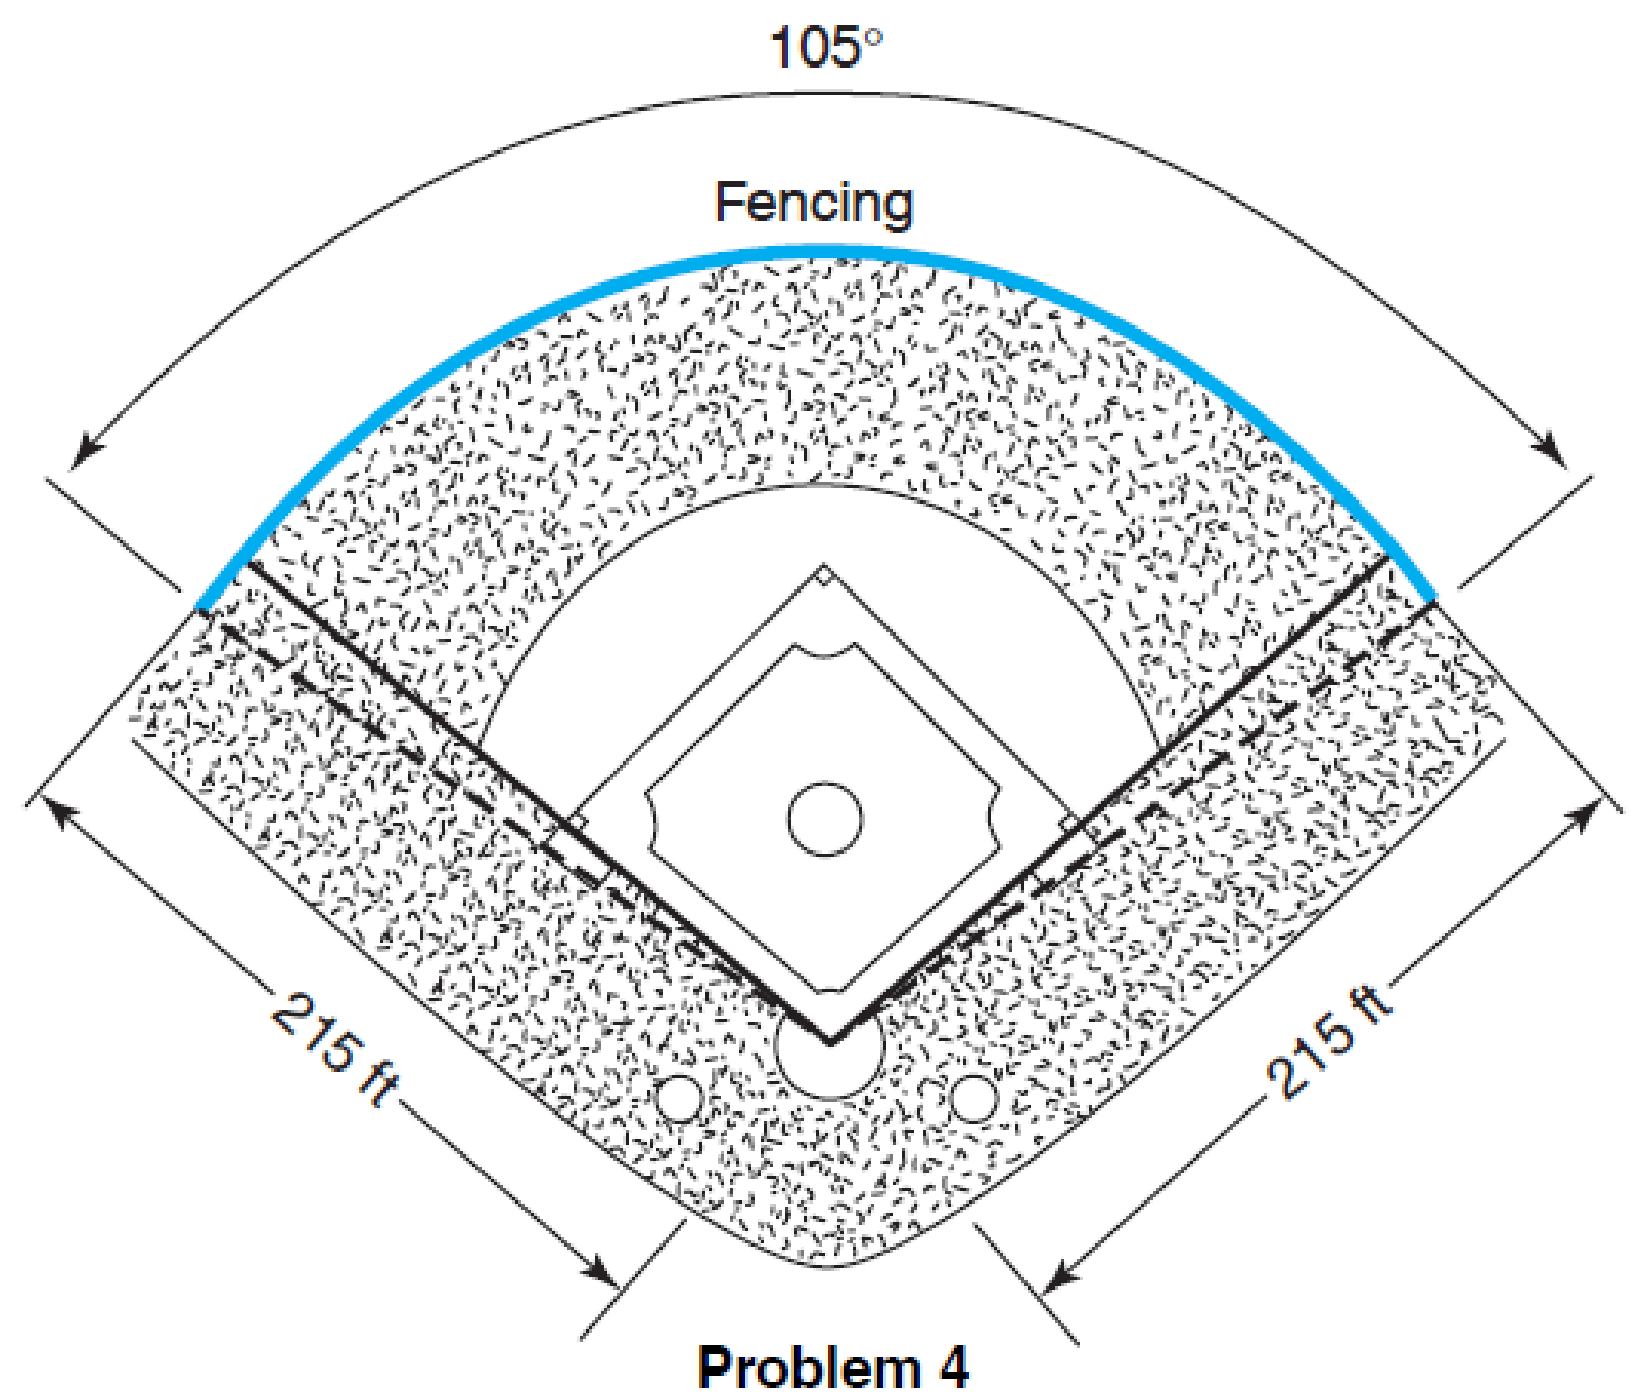 Chapter 10.1, Problem 4DE, Construction The outfield fencing for a Little League field forms a circular sector with home plate 